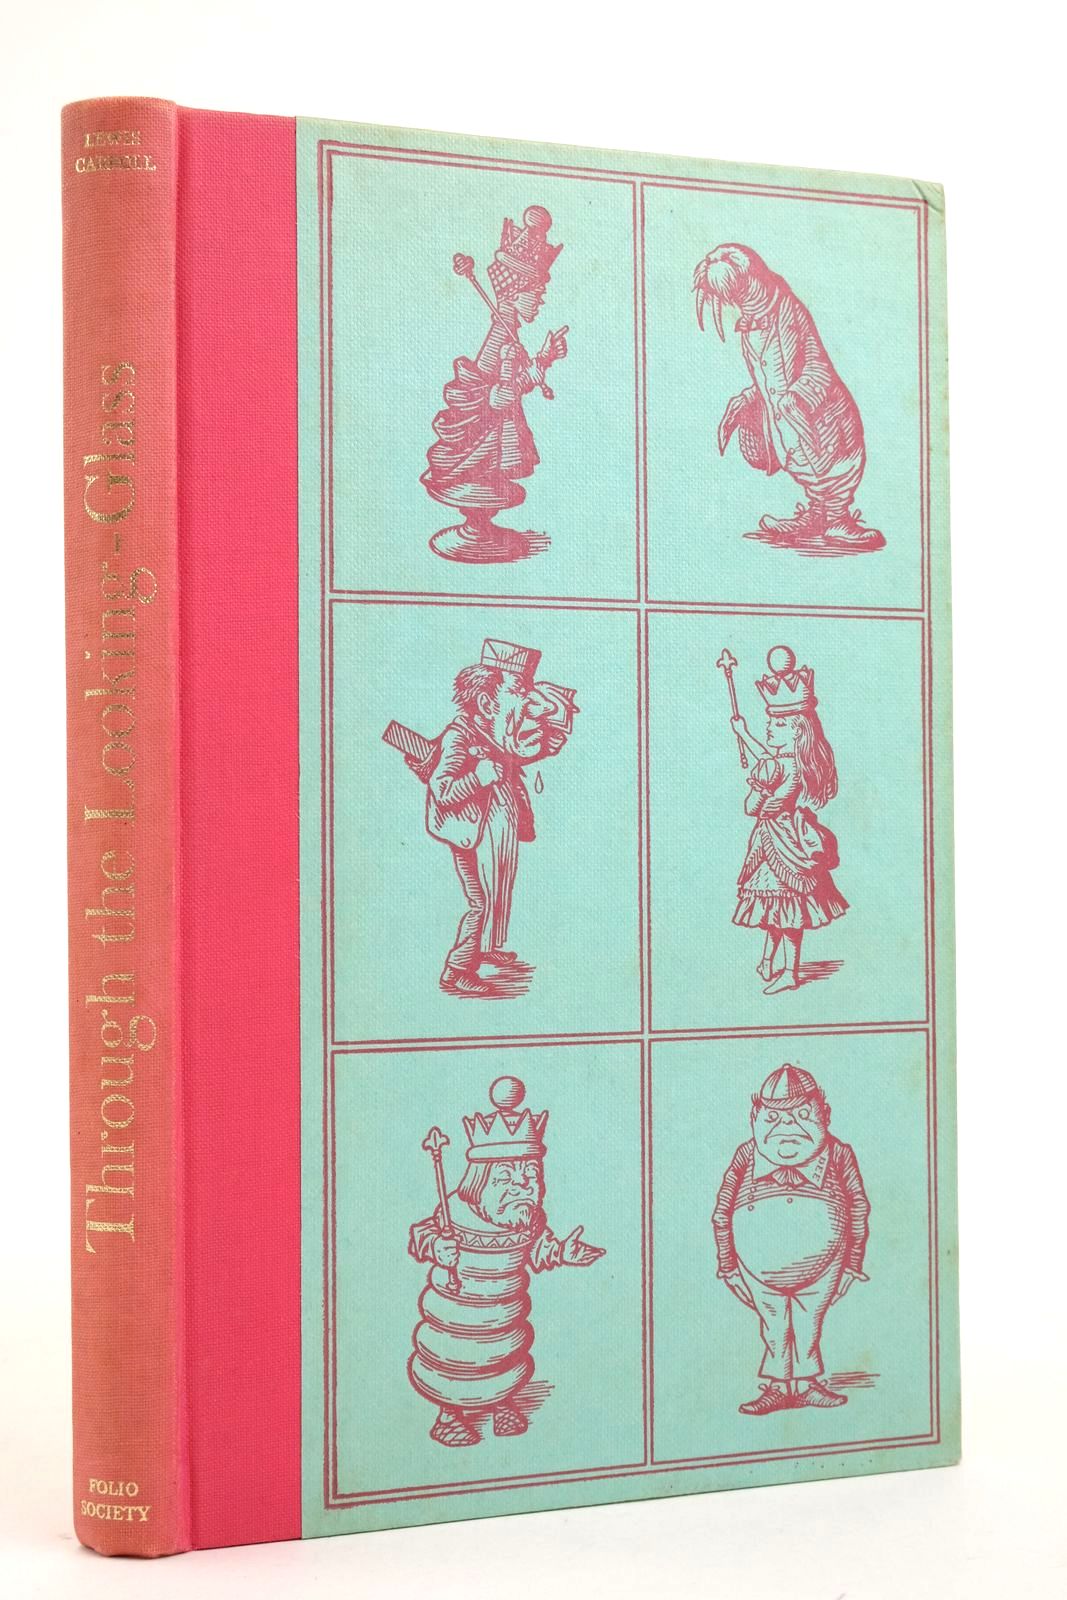 Photo of THROUGH THE LOOKING-GLASS AND WHAT ALICE FOUND THERE written by Carroll, Lewis illustrated by Tenniel, John published by Folio Society (STOCK CODE: 2136901)  for sale by Stella & Rose's Books